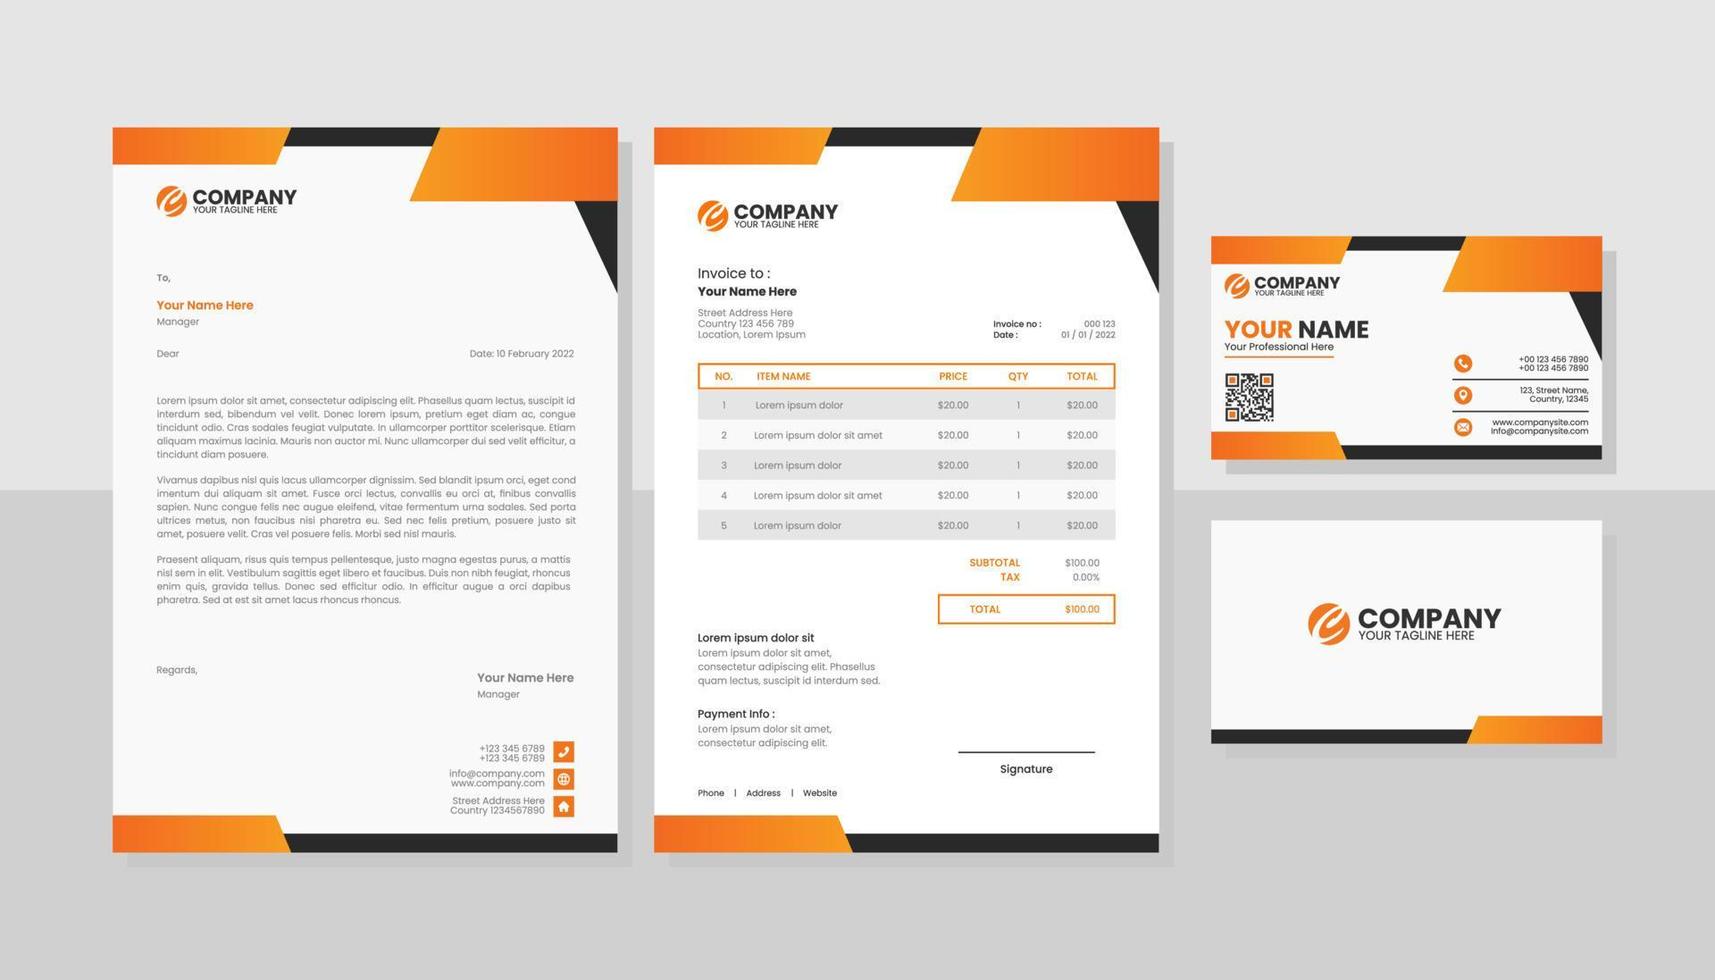 Corporate business stationery pack template vector